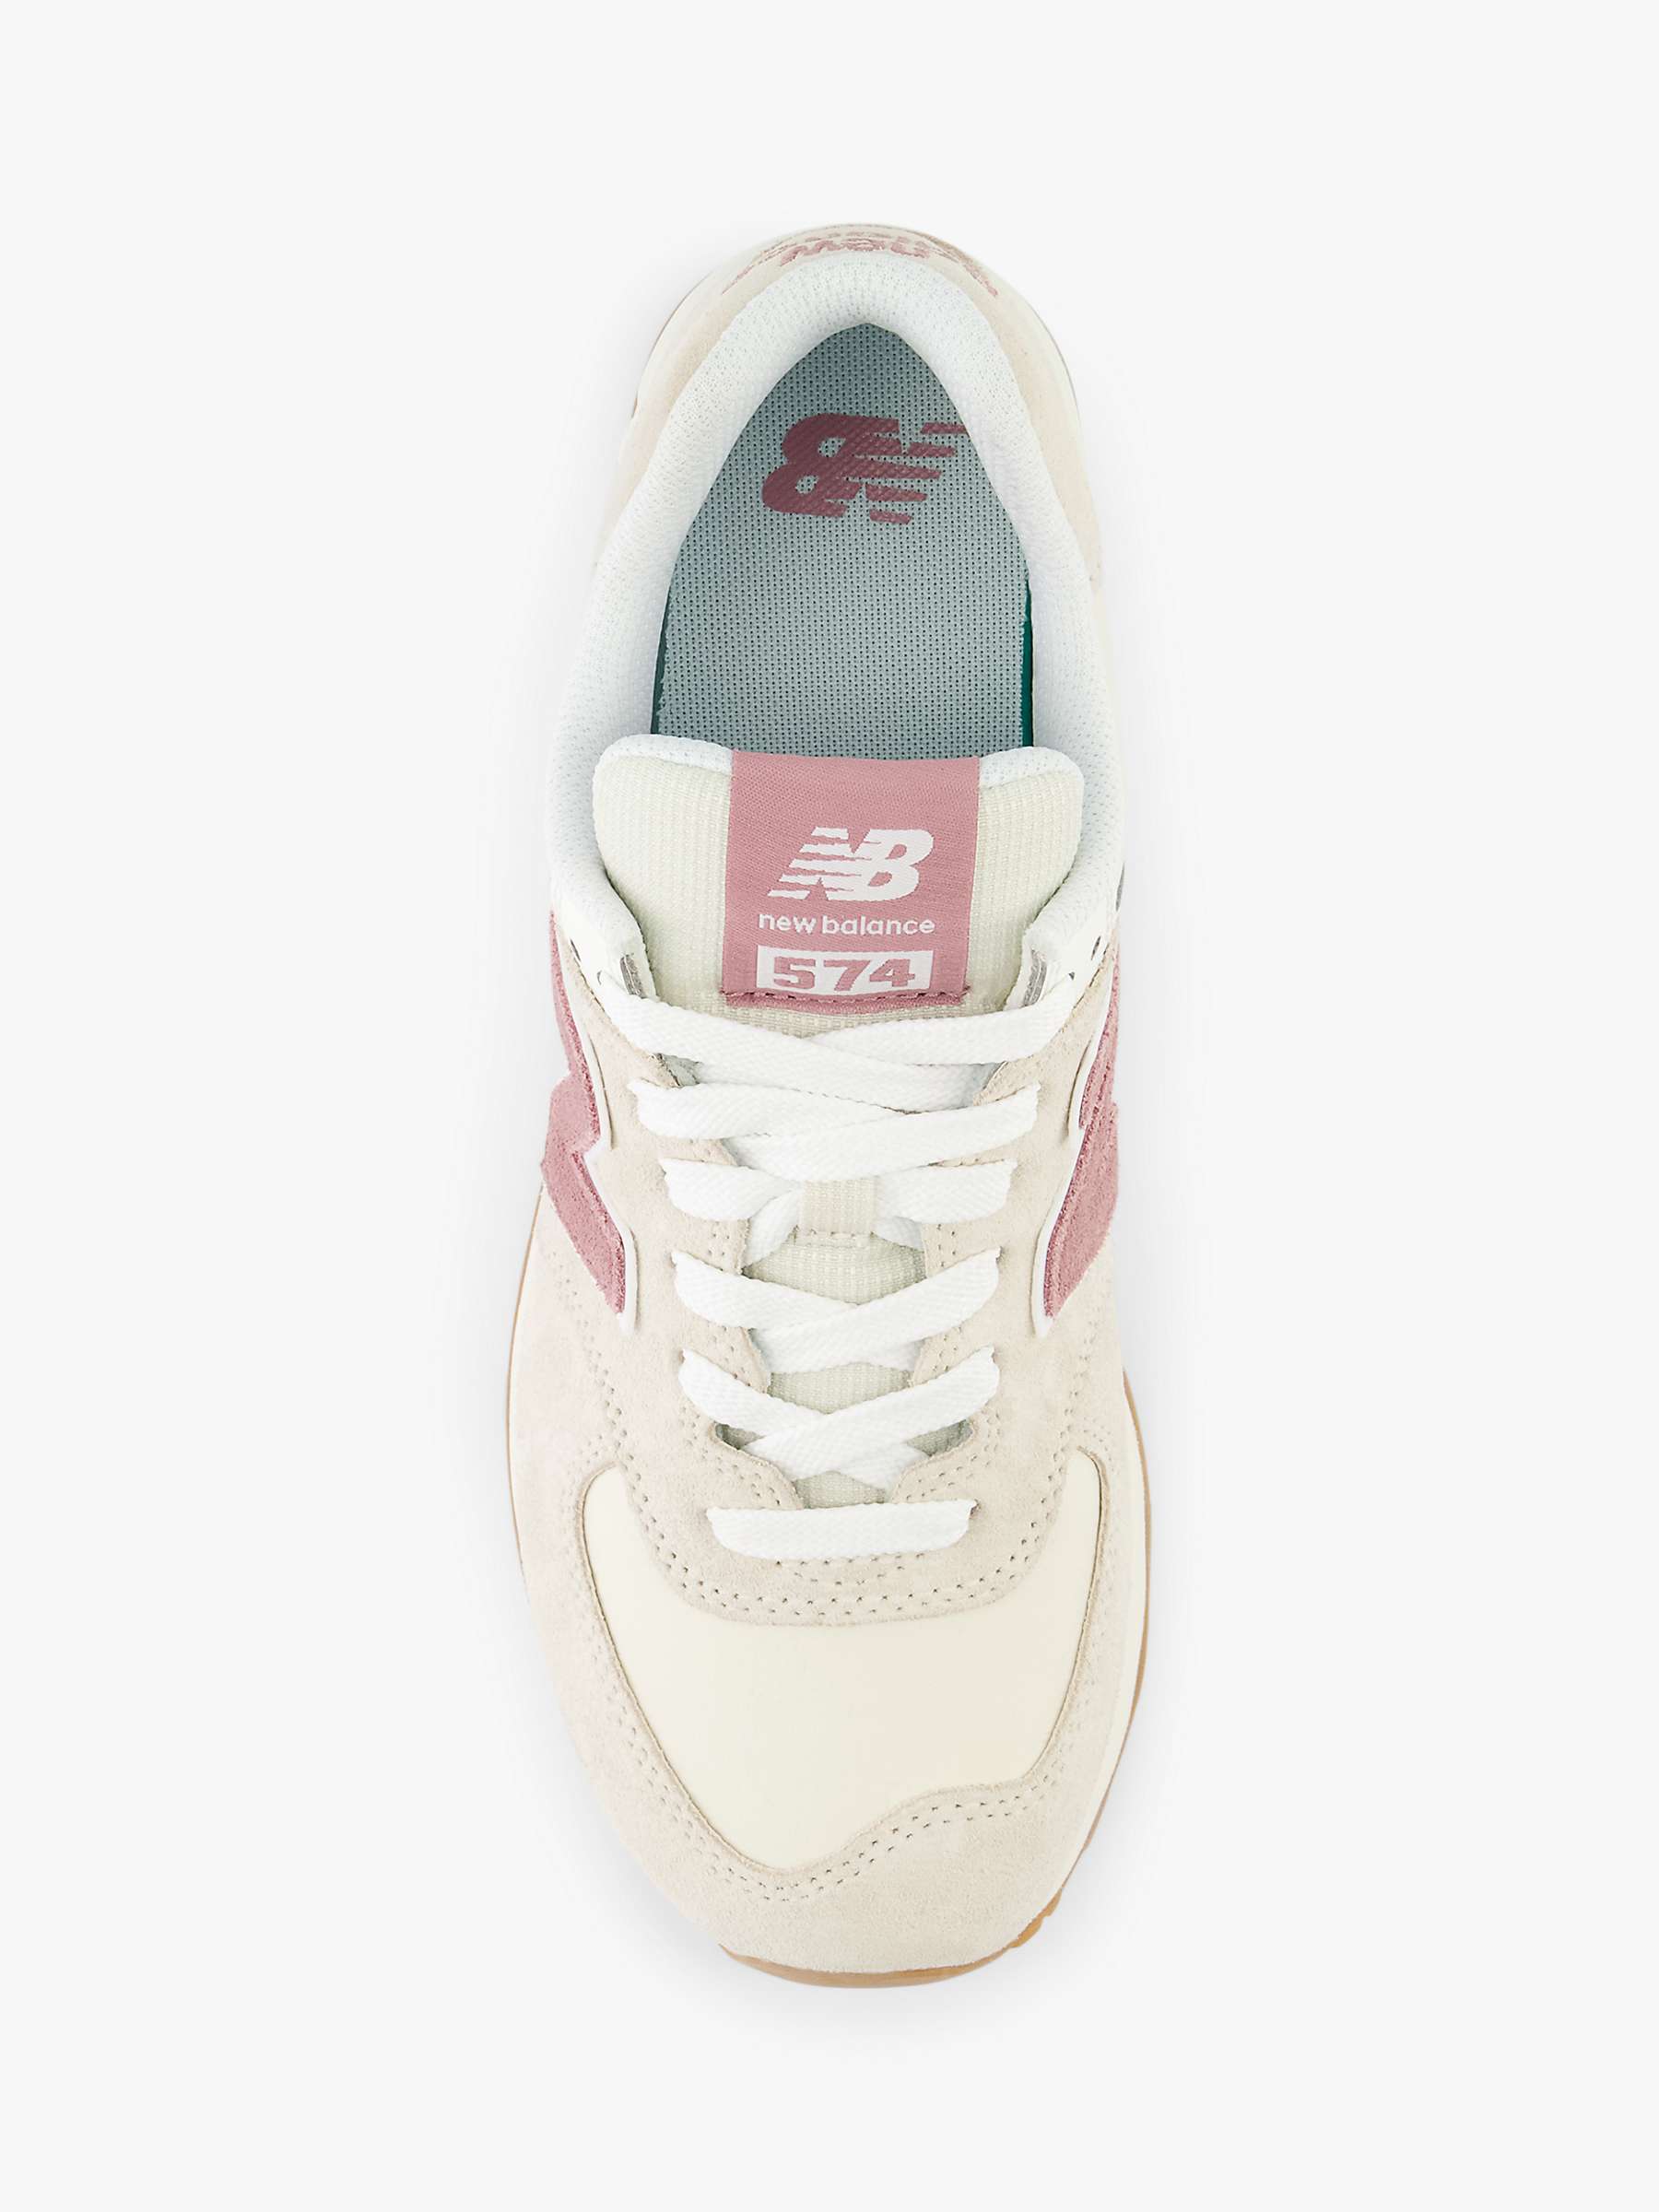 Buy New Balance 574 Suede Mesh Trainers Online at johnlewis.com